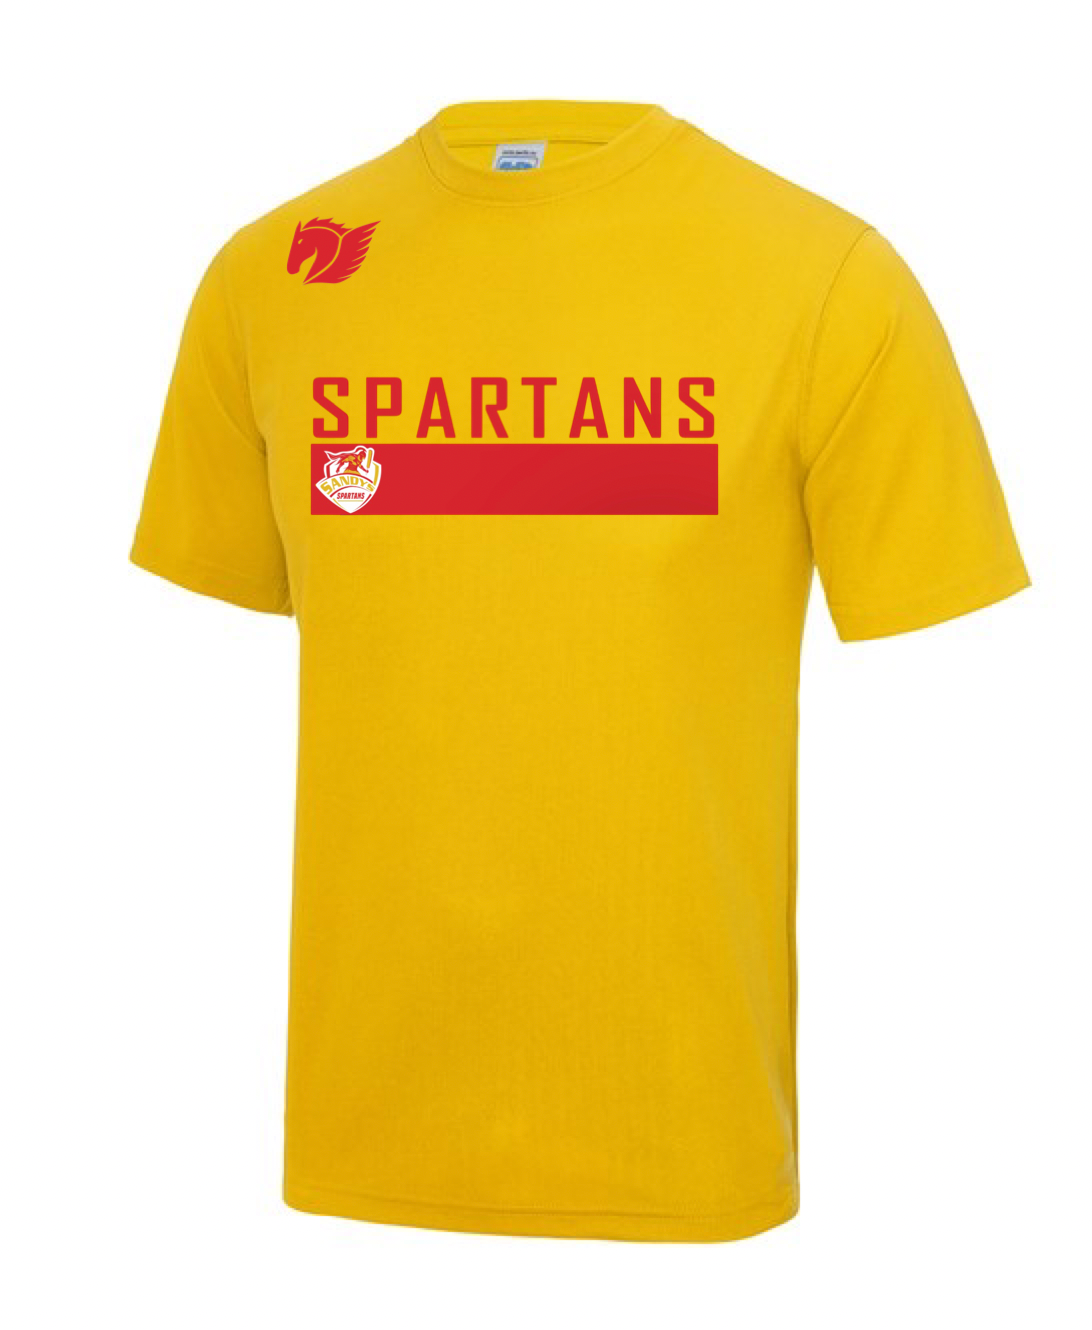 Sandy’s Spartan Supporters Shirt